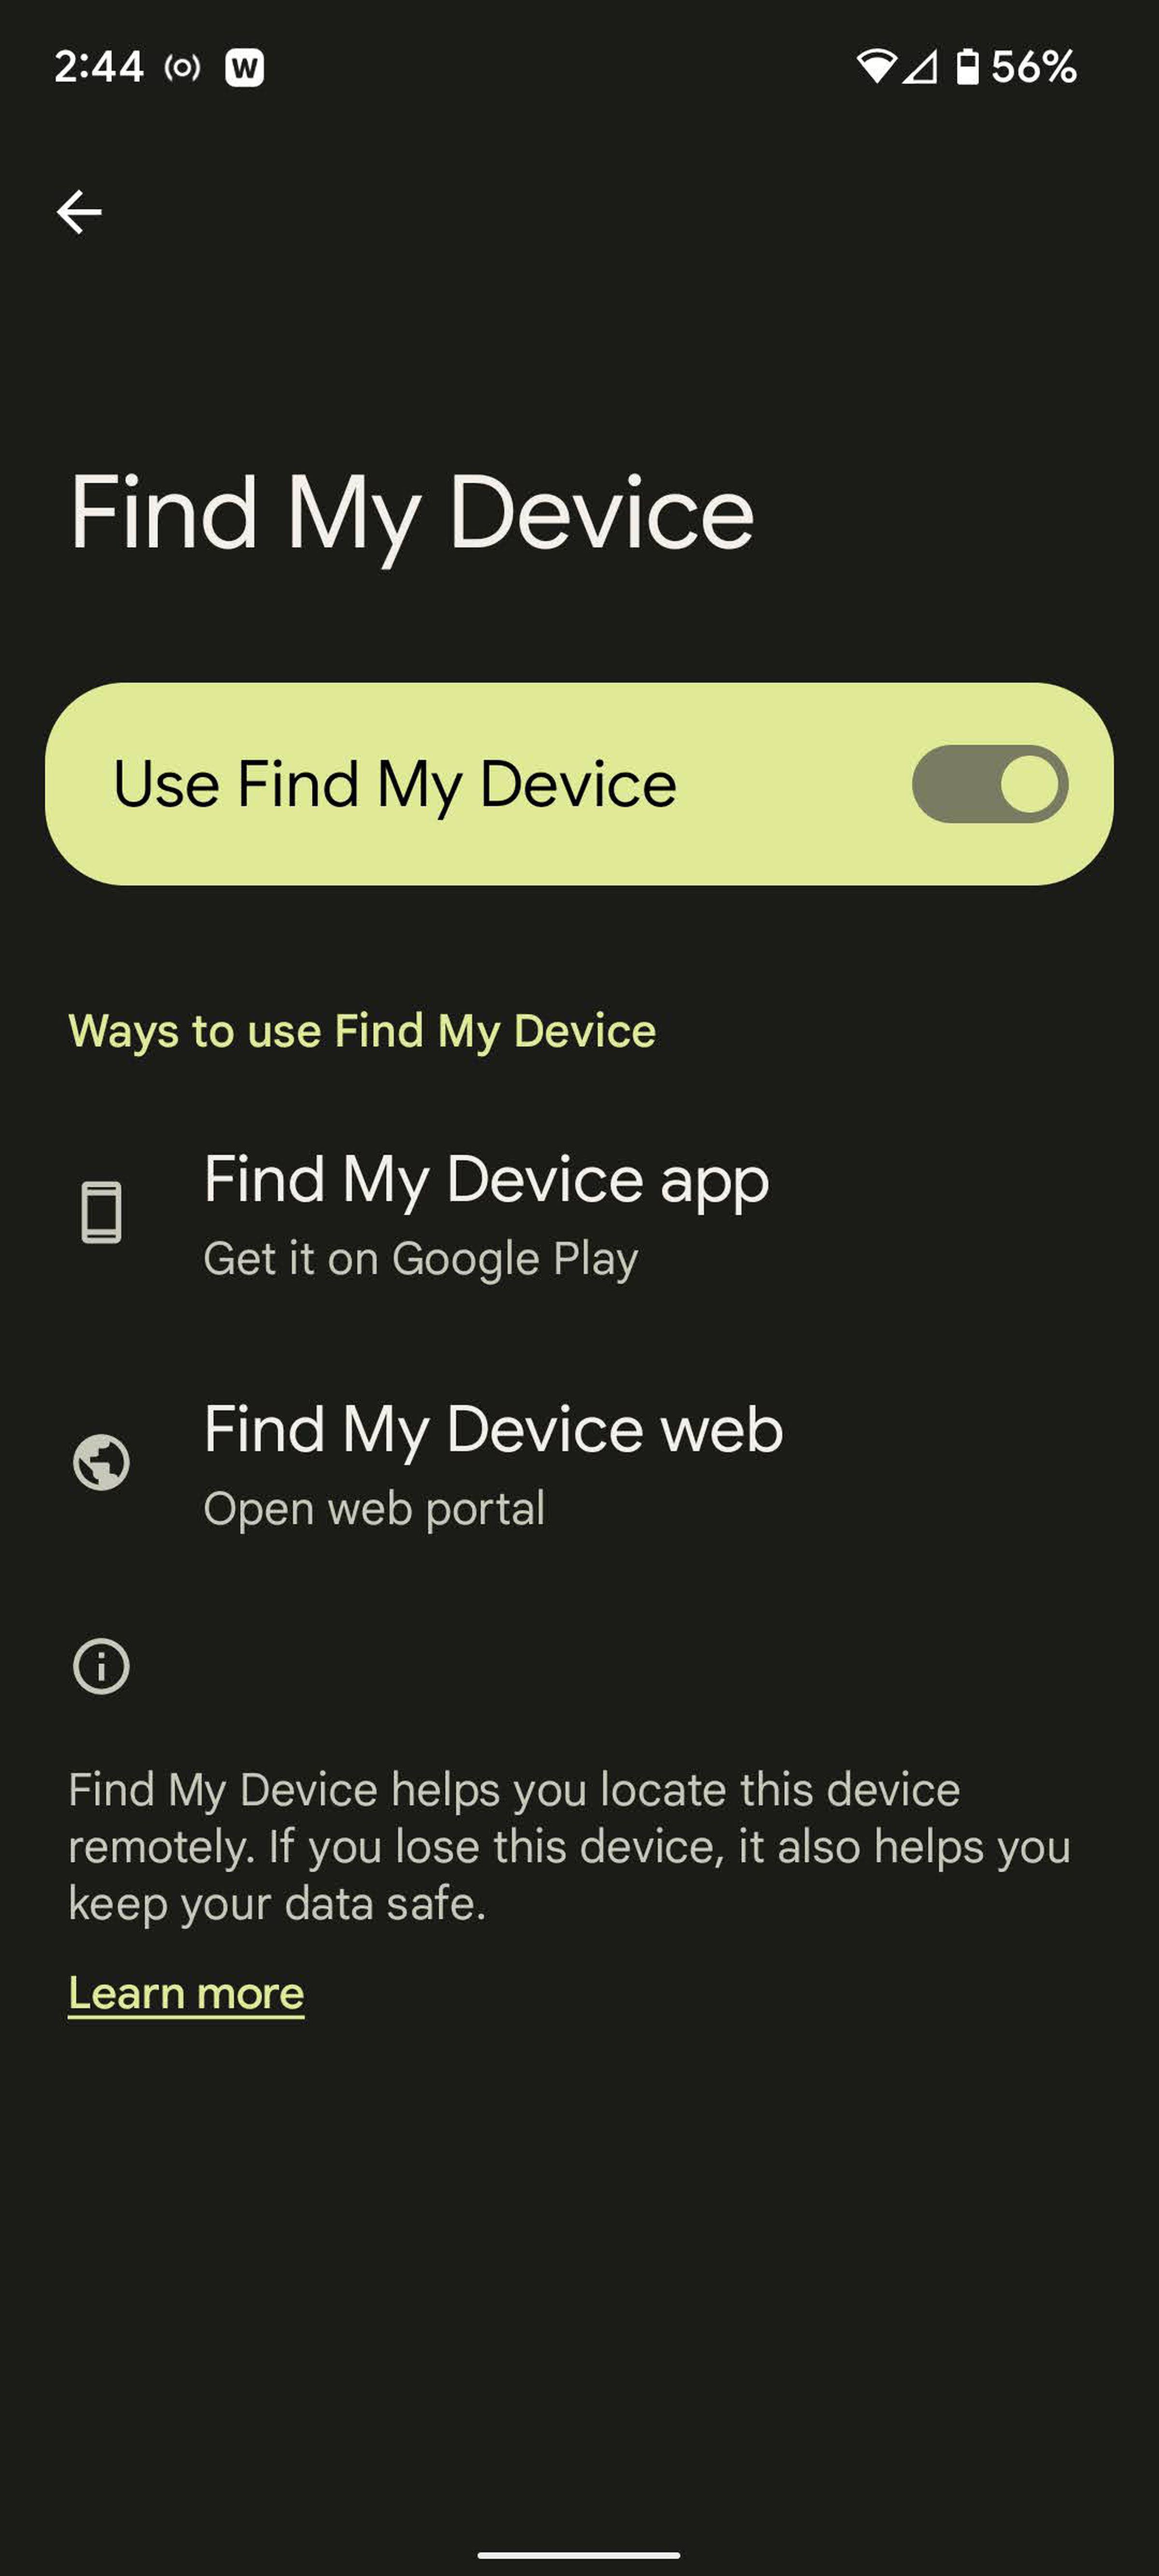 Toggle on Use Find My Device.